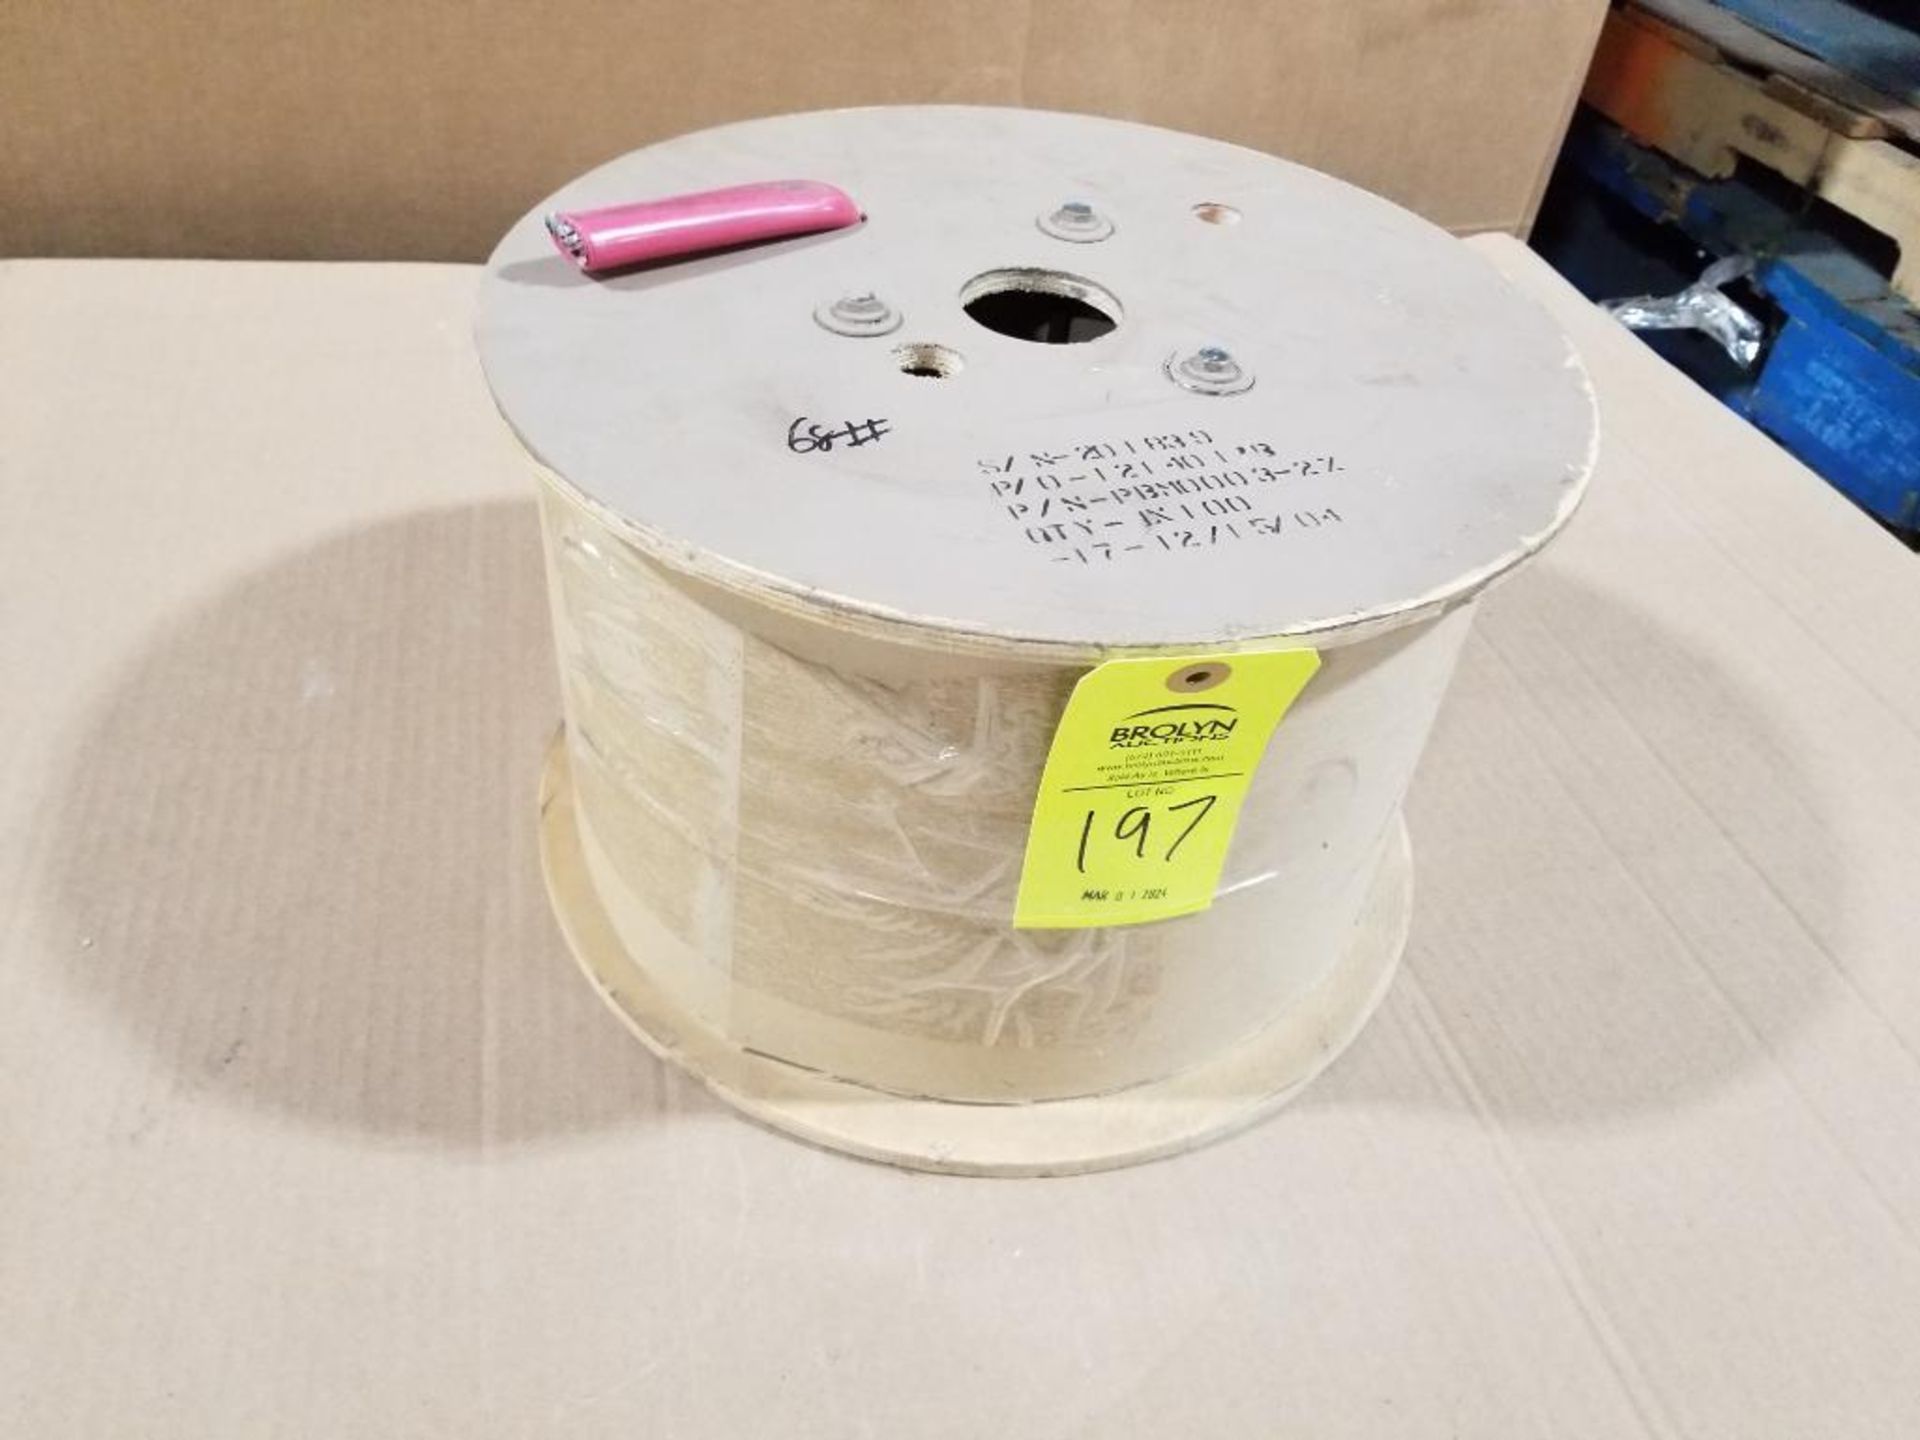 100ft roll of 3awg wire. Tinned copper. Part number PBM0003-2%. 68lb gross roll weight. . - Image 7 of 7